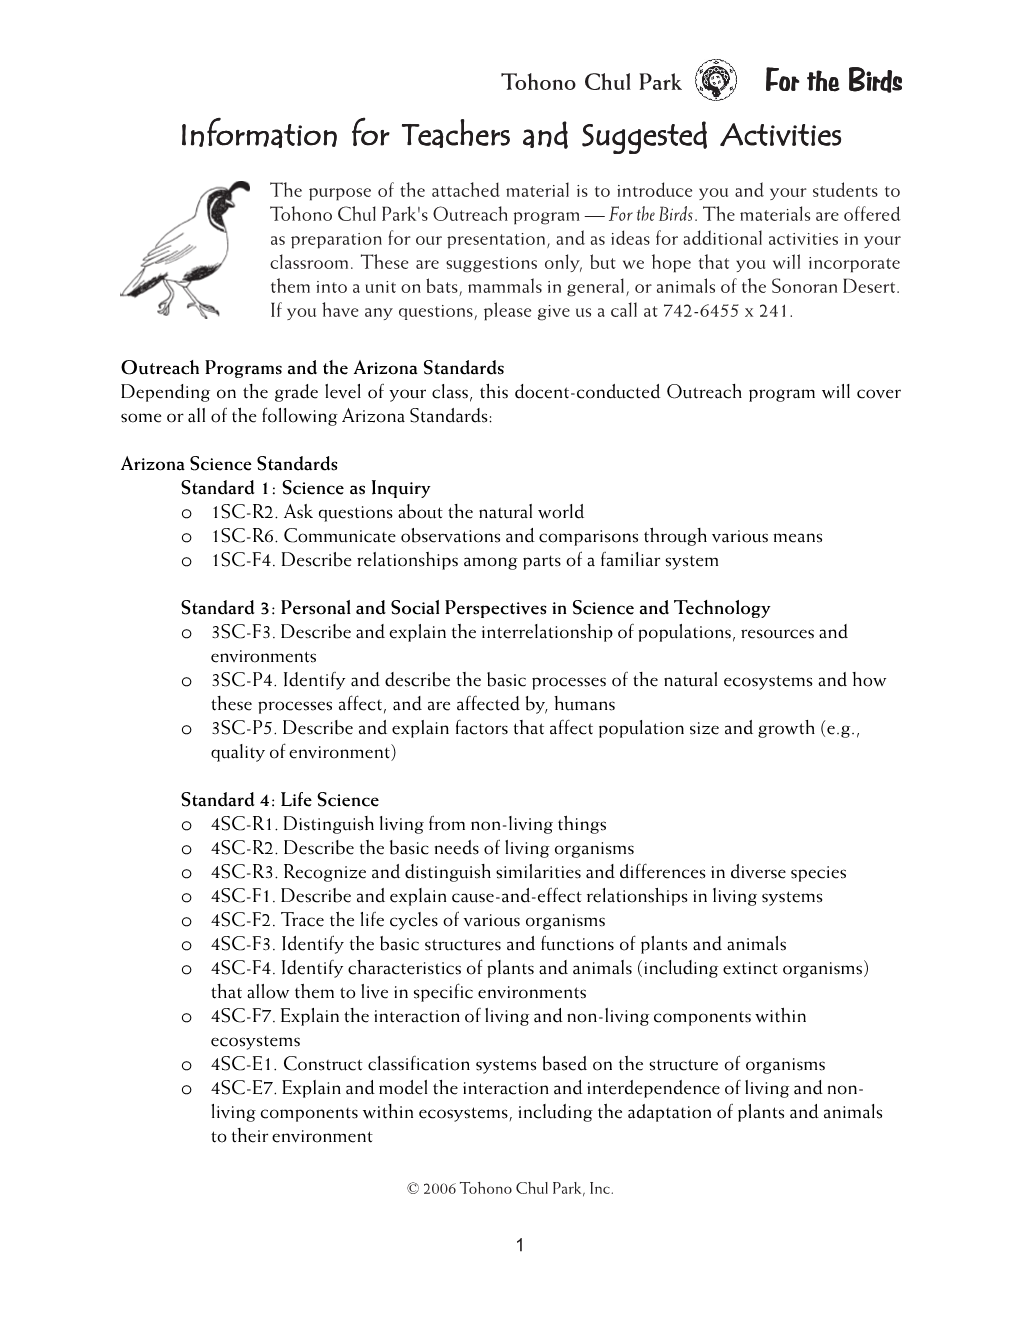 For the Birds Information for Teachers and Suggested Activities